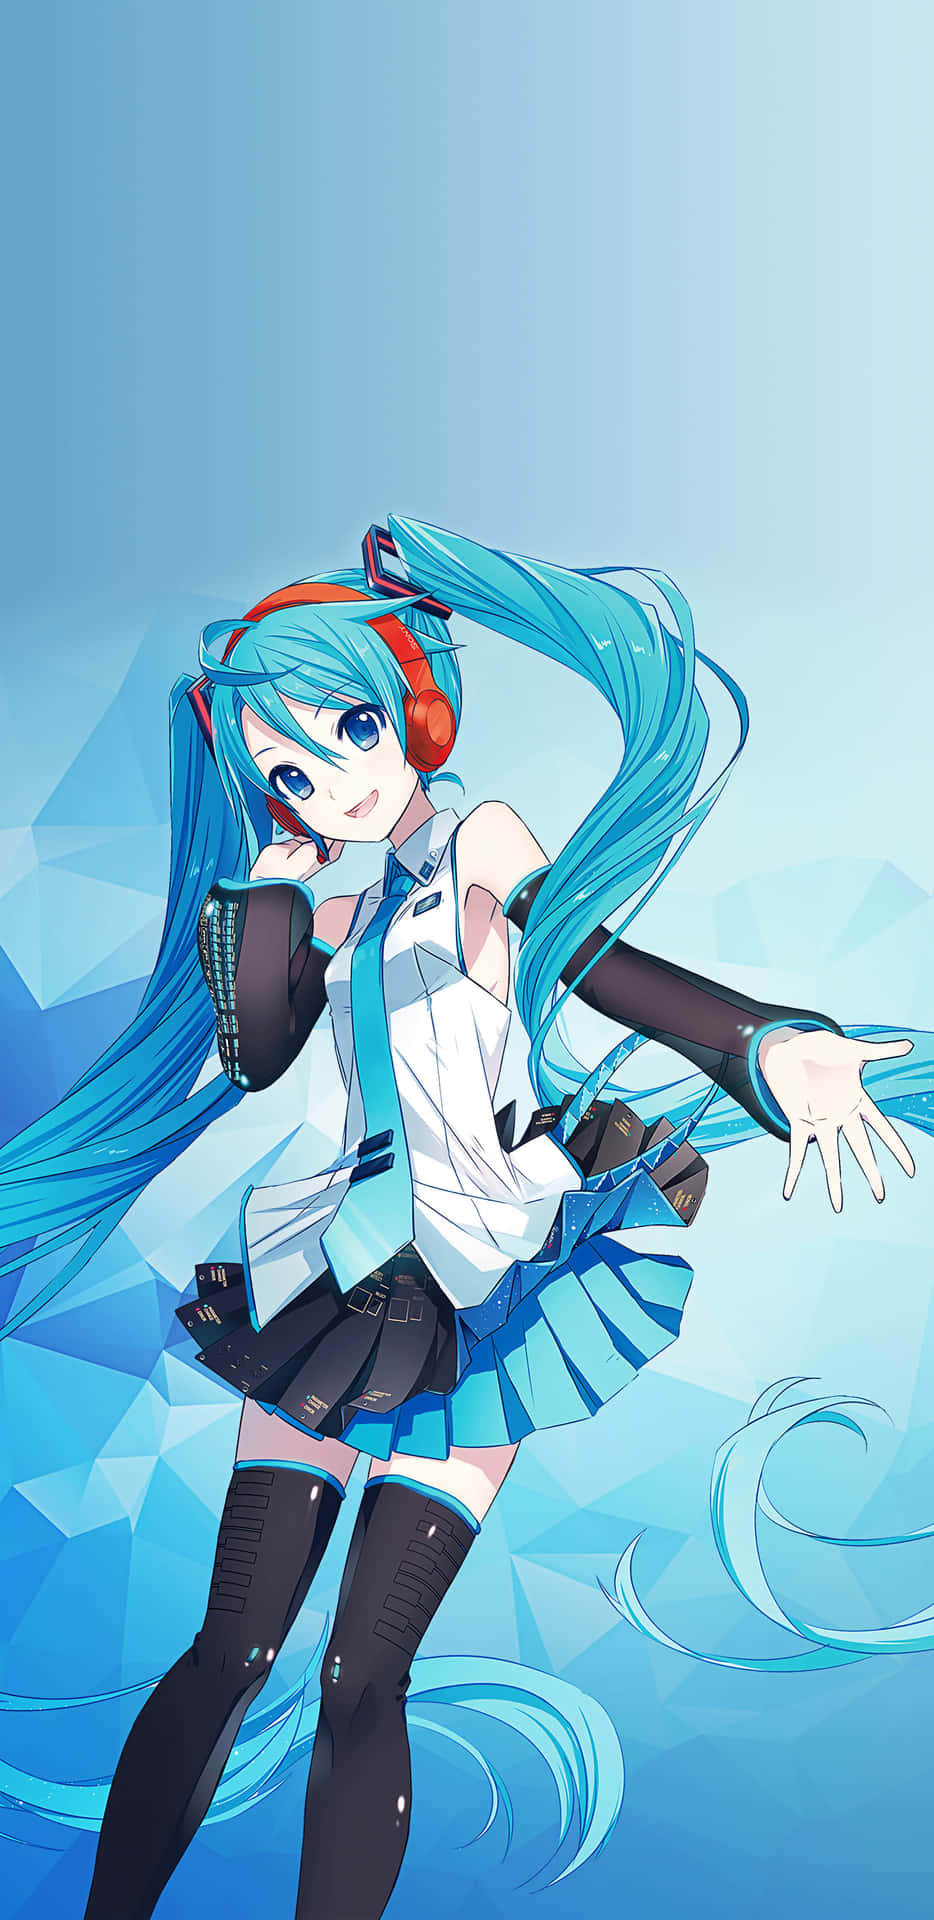 Expanding your power with Hatsune Miku: Camera, Music and More, All in One! Wallpaper